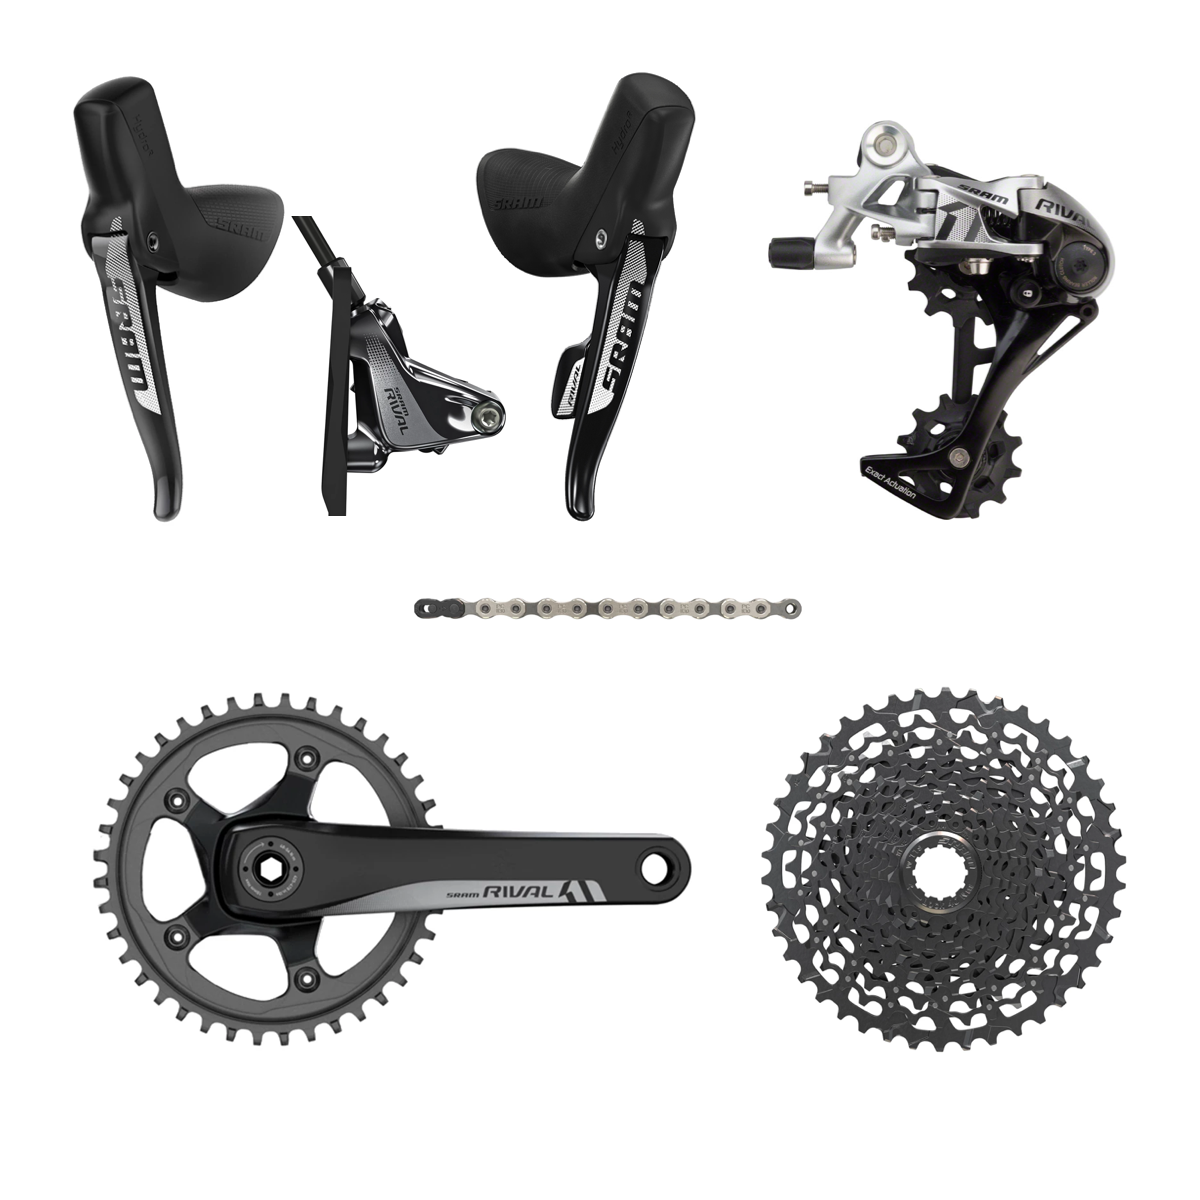 NEW SRAM Rival HRD 1x11 Speed Groupset, 170mm, 42t, 11-42t, GXP